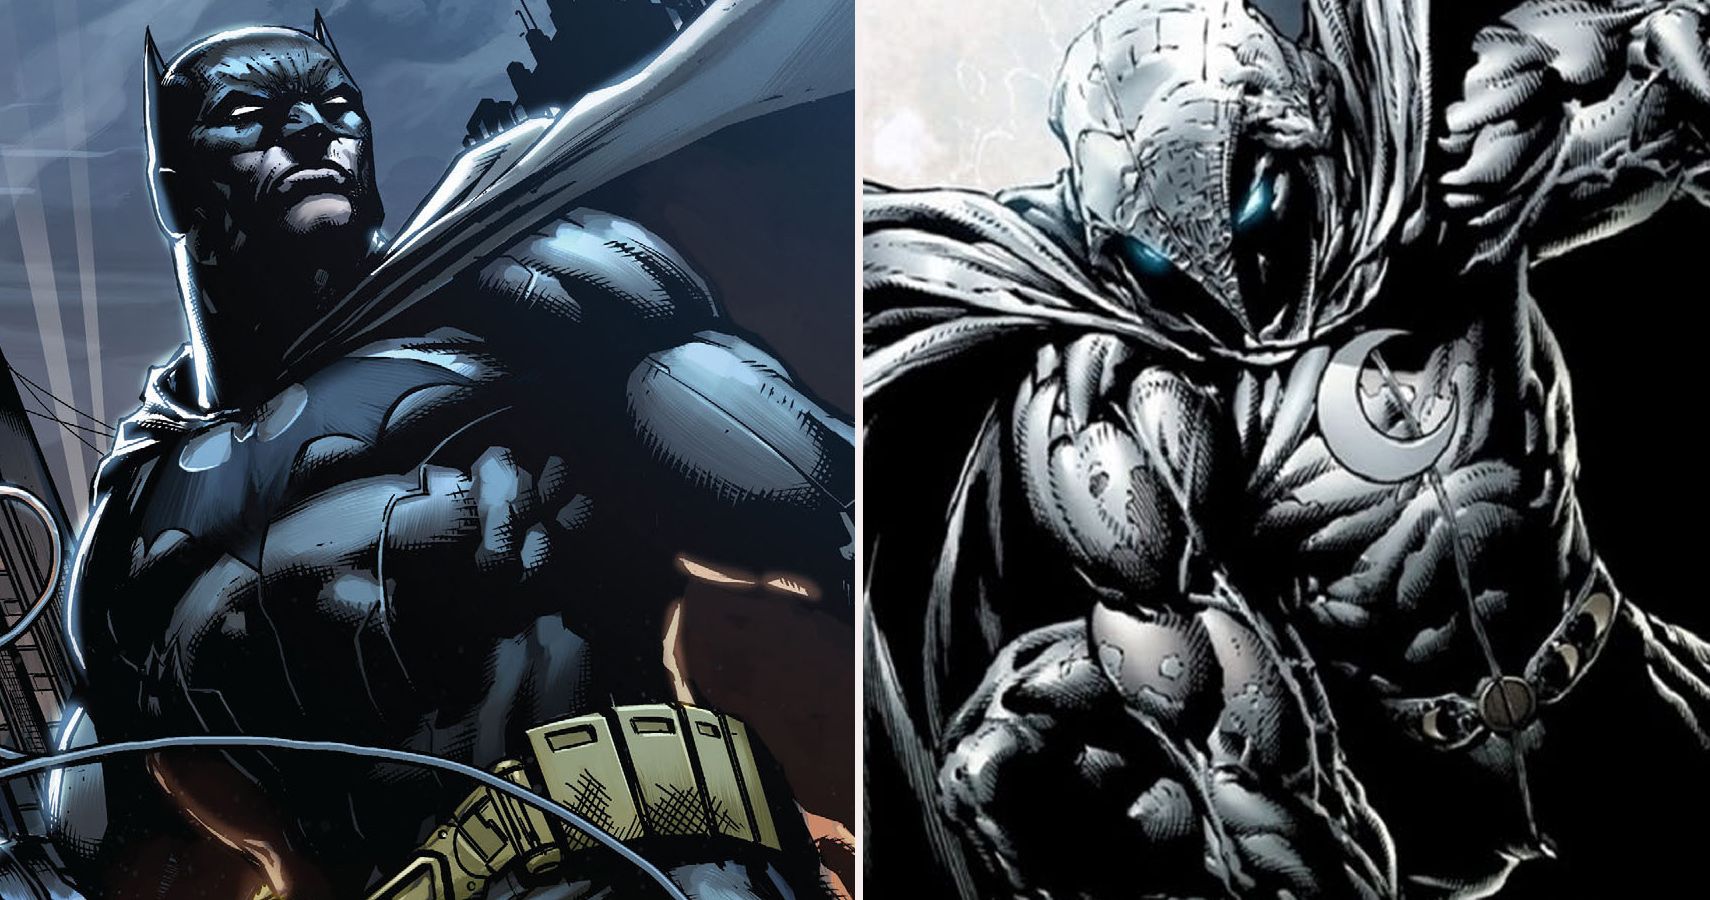 batman moon knight who is better fighter featured image